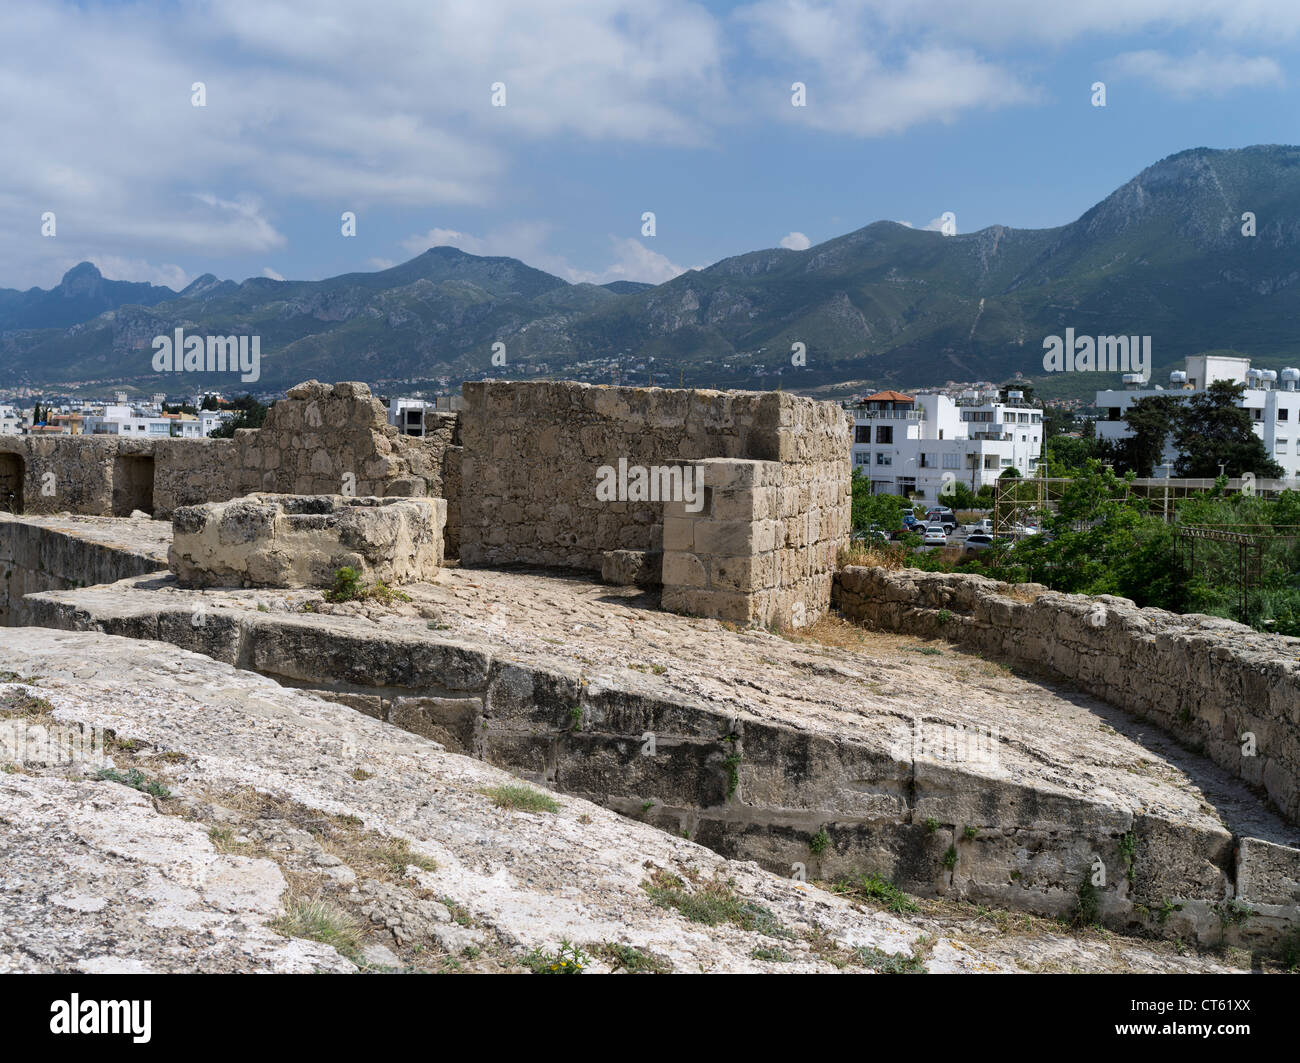 dh Girne Castle KYRENIA NORTHERN CYPRUS Venetian castle walls Kyrenia town and Besparmak mountains wall defences defence venitian fortification Stock Photo